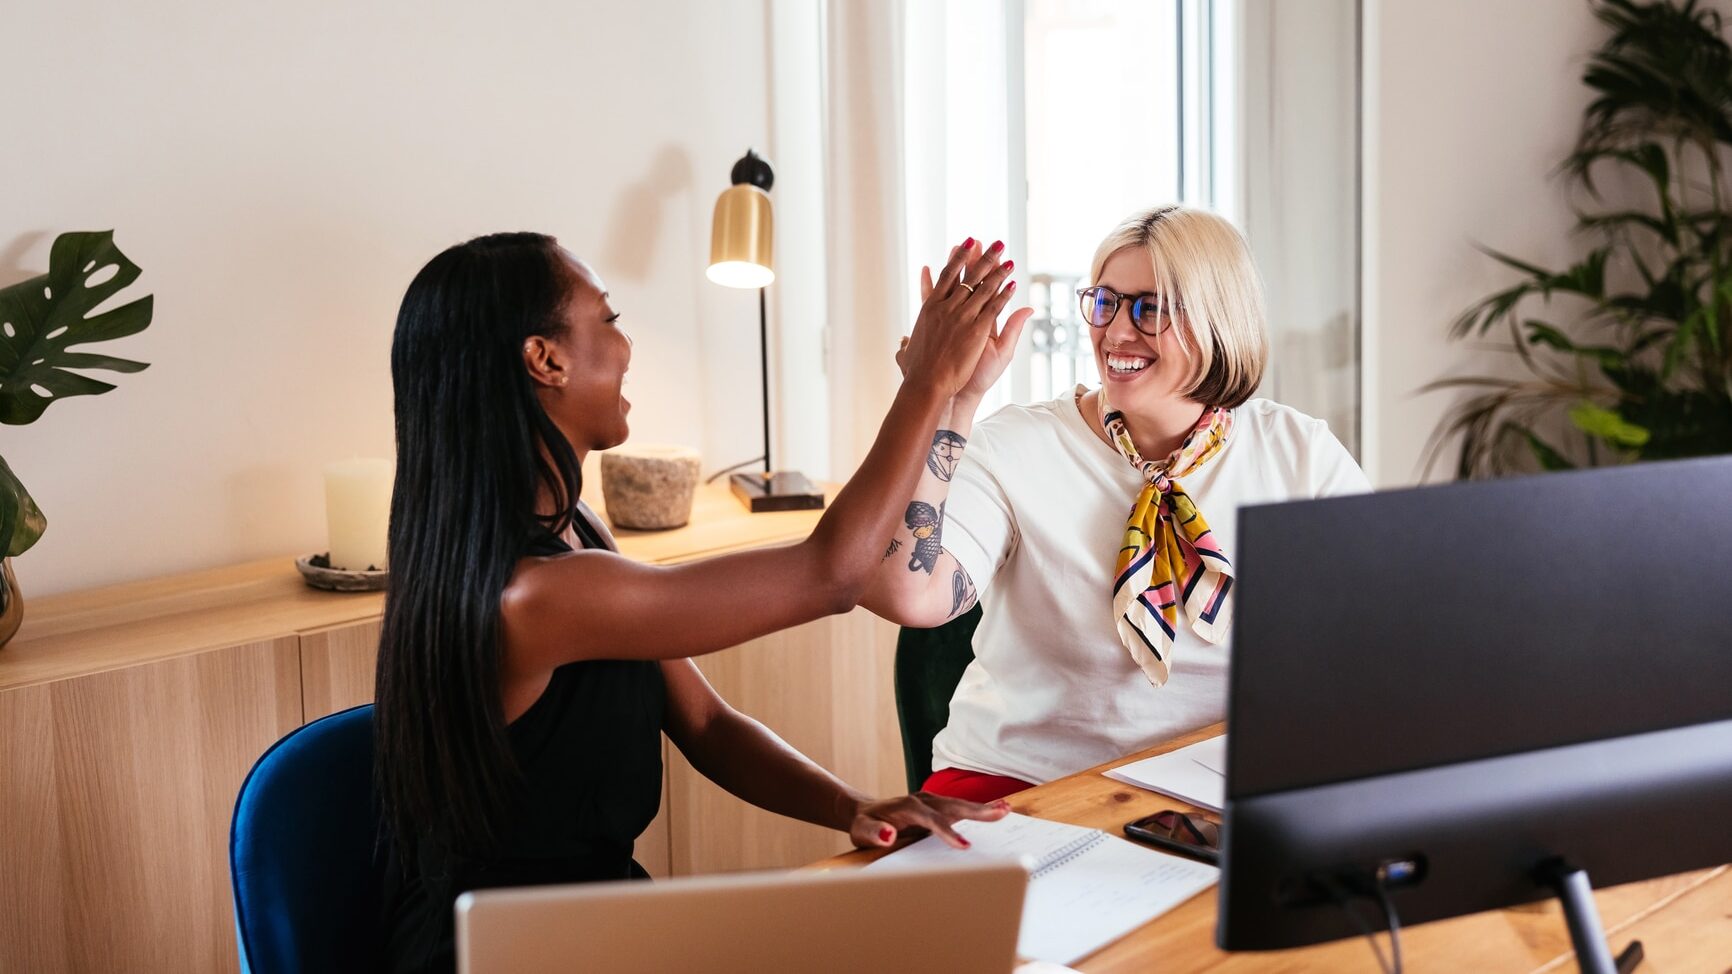 Laughing young curvy blond woman and stylish black female colleague and giving high five. They are looking at each other and celebrating successful business deal while sitting at desk with computer and laptop.